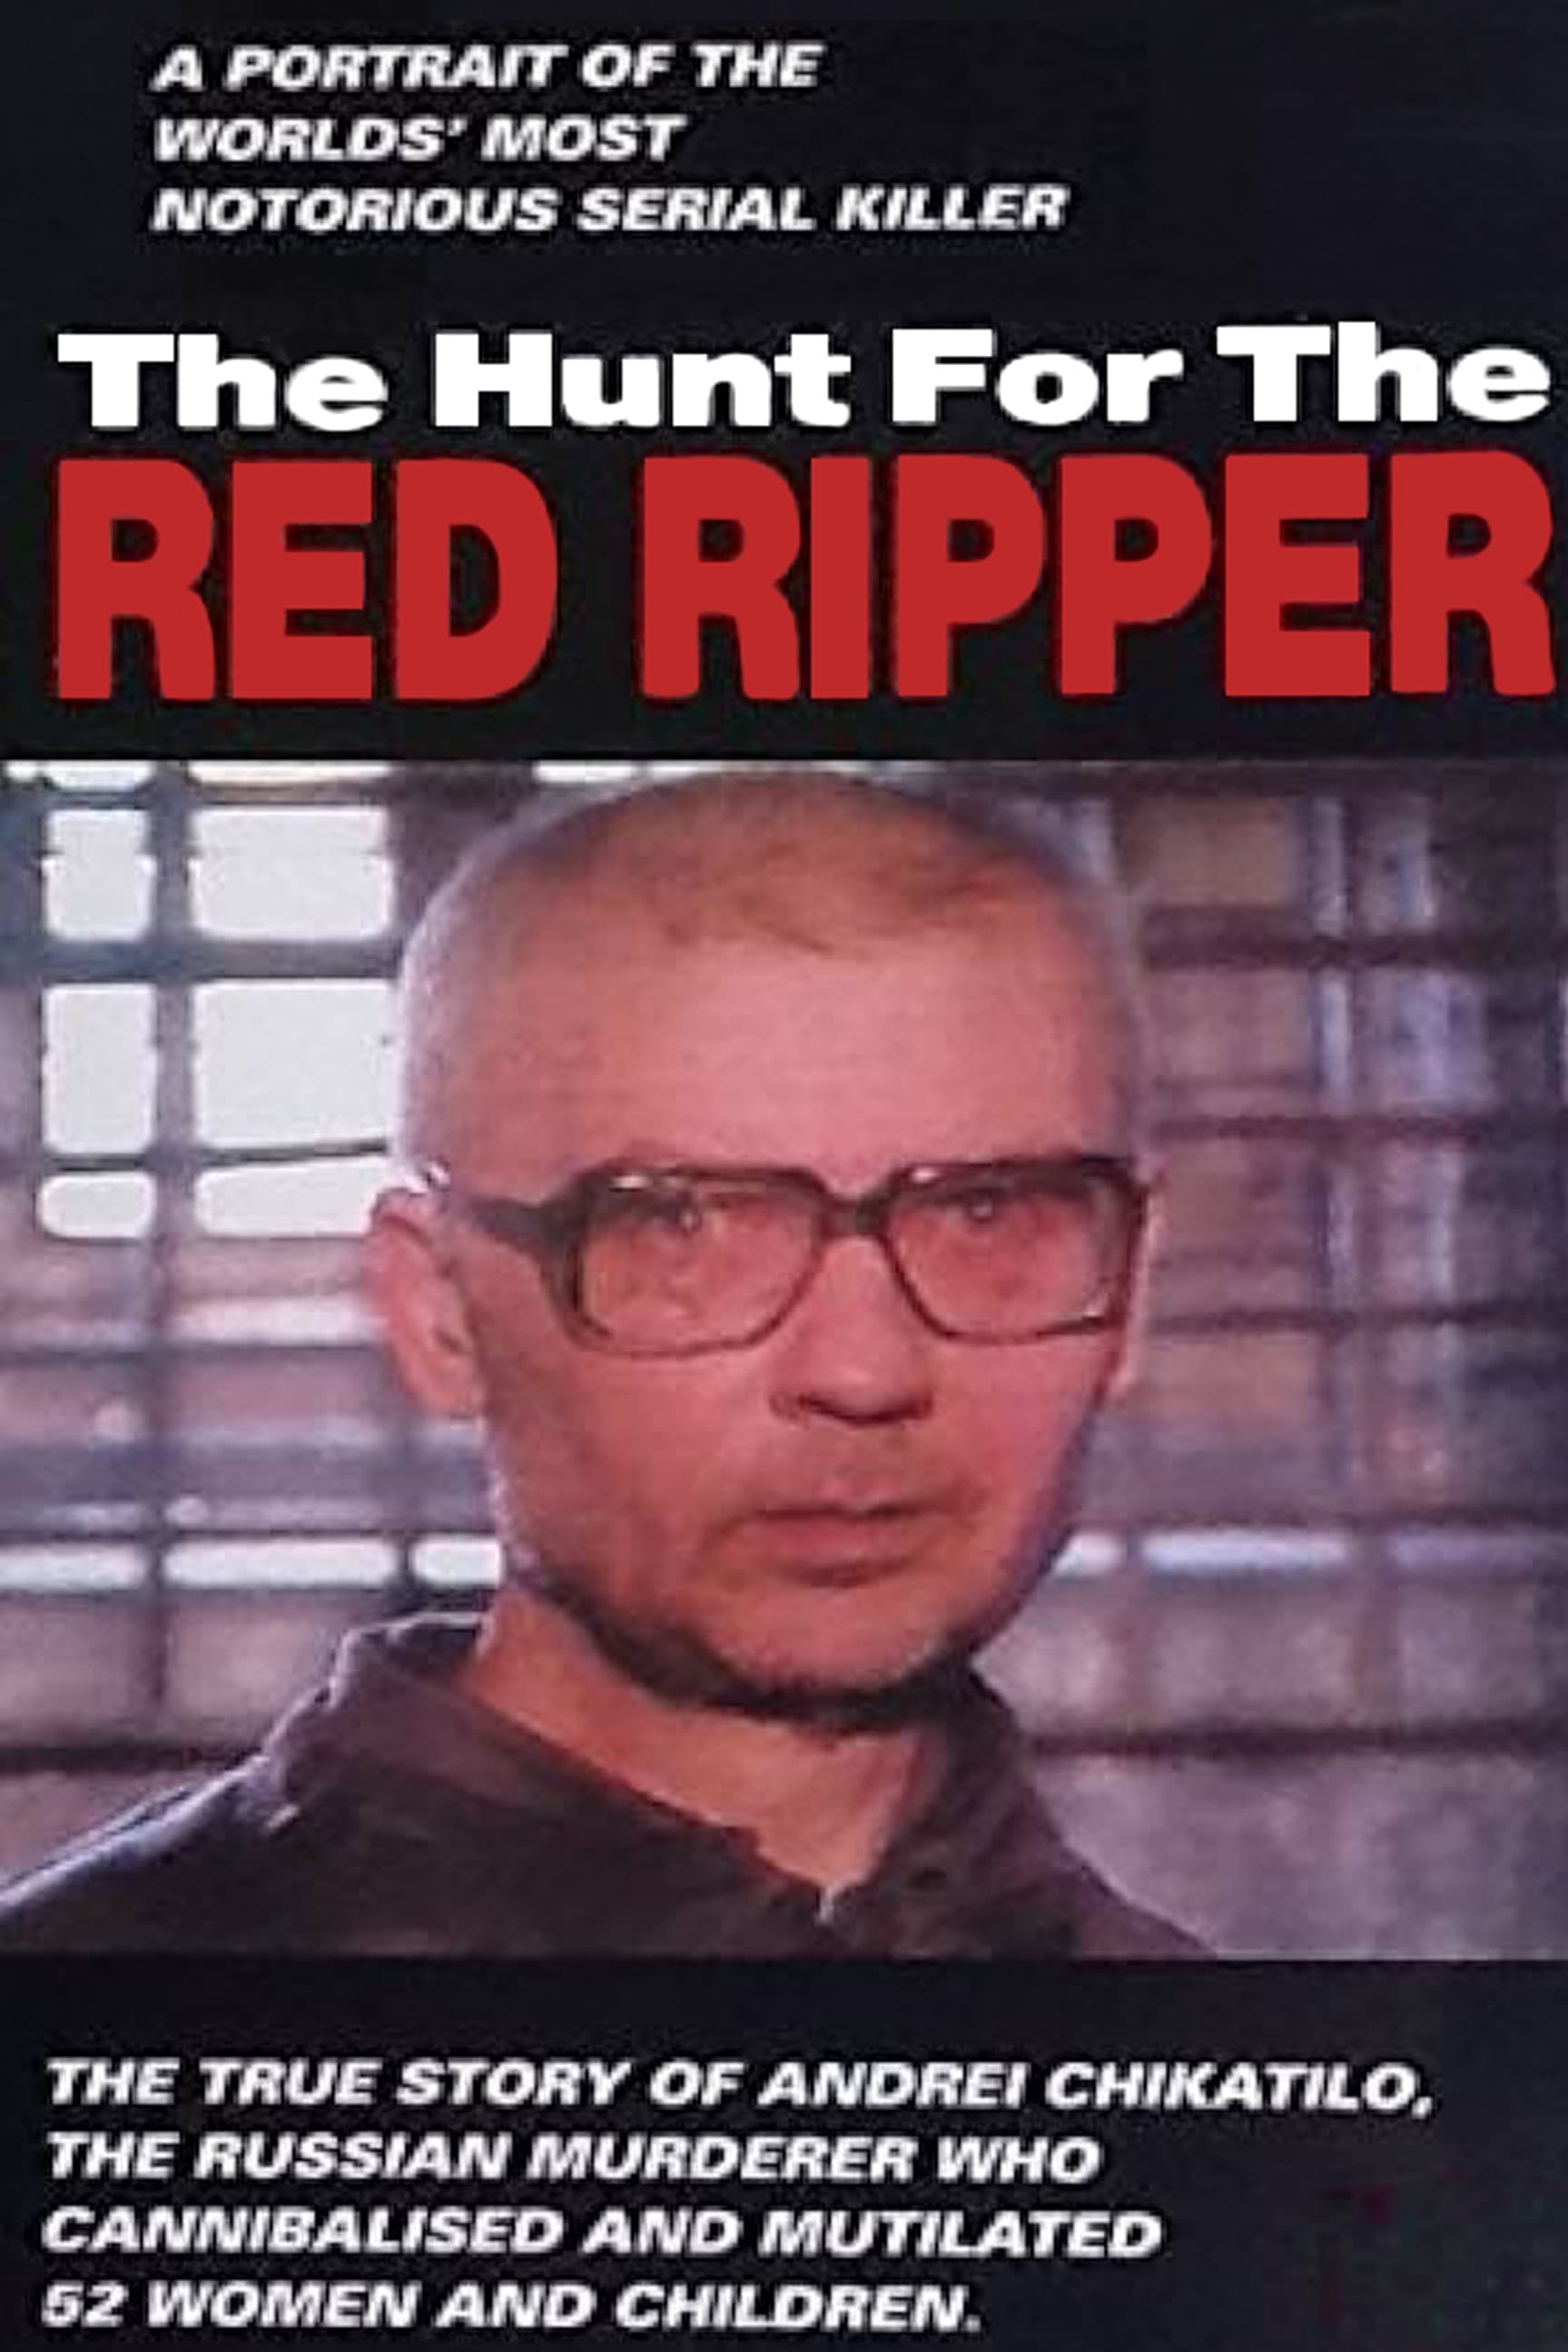 The Hunt for the Red Ripper film